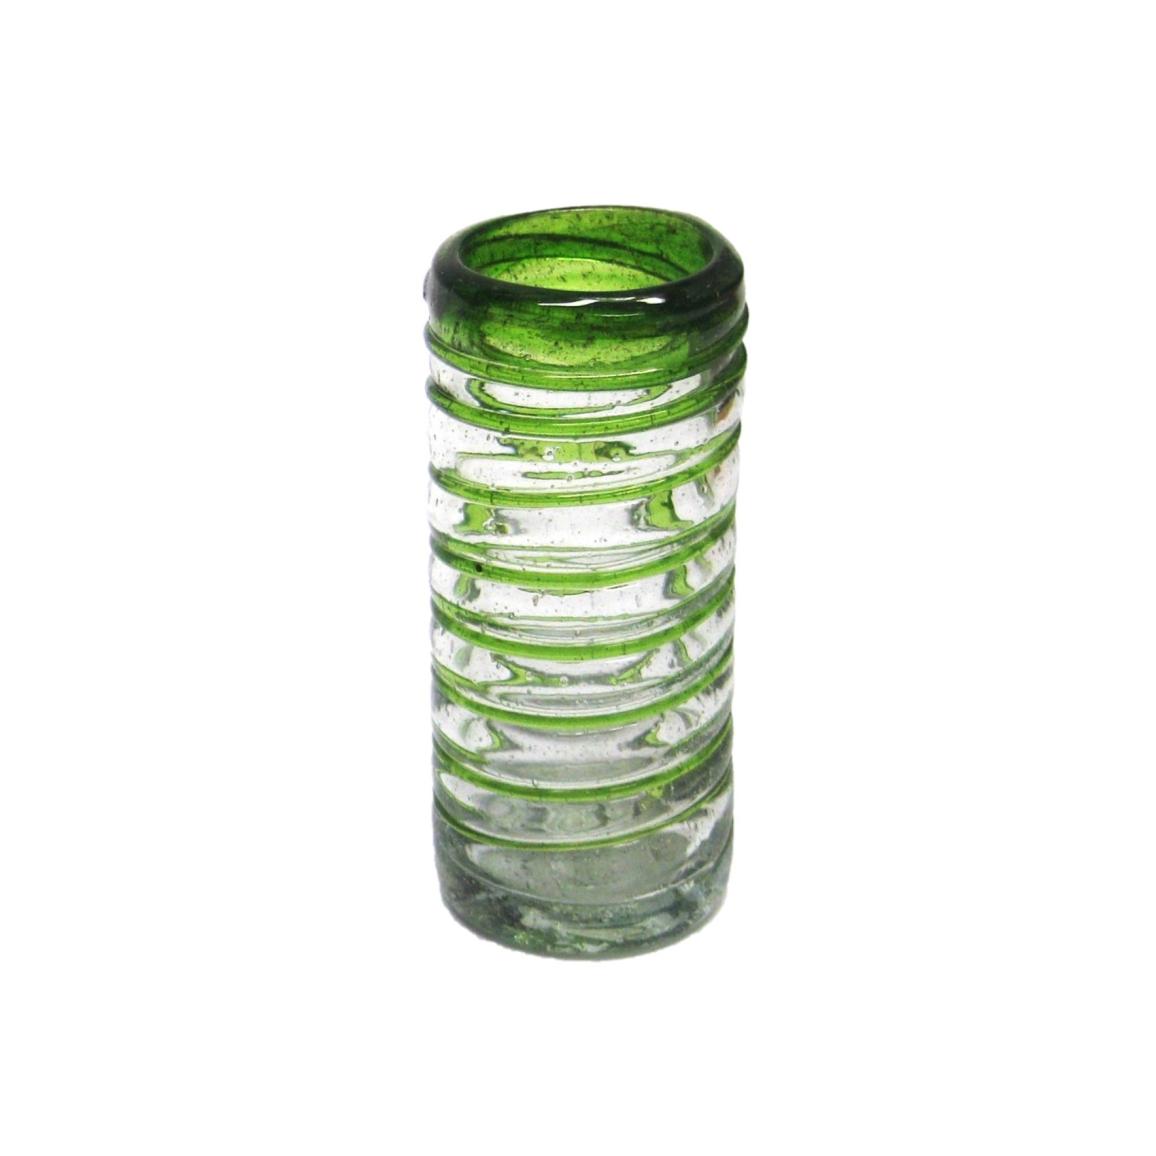 Tequila Shot Glasses / Emerald Green Spiral 2 oz Tequila Shot Glasses (set of 6) / Emerald green threads spinned to embrace these gorgeous shot glasses, perfect for parties or enjoying your favorite liquor.